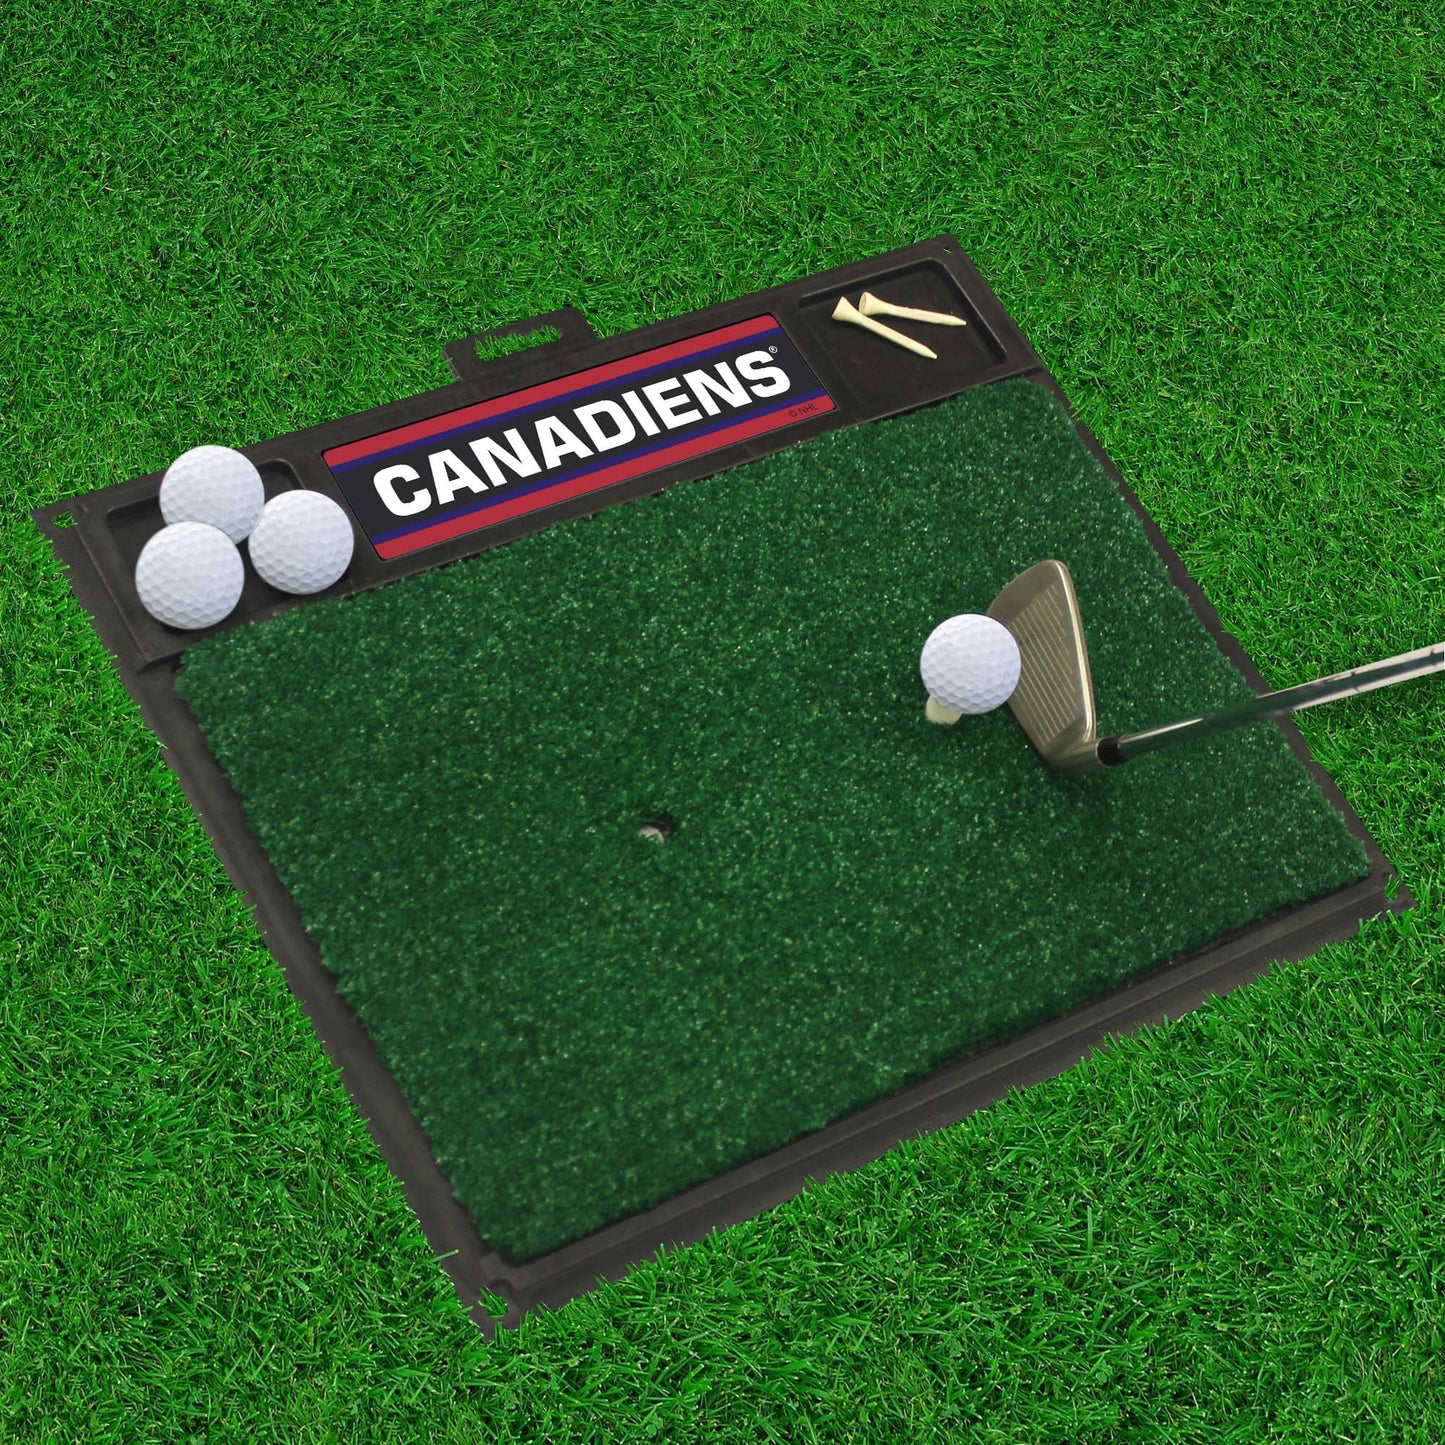 Montreal Canadiens Golf Hitting Mat by Fanmats